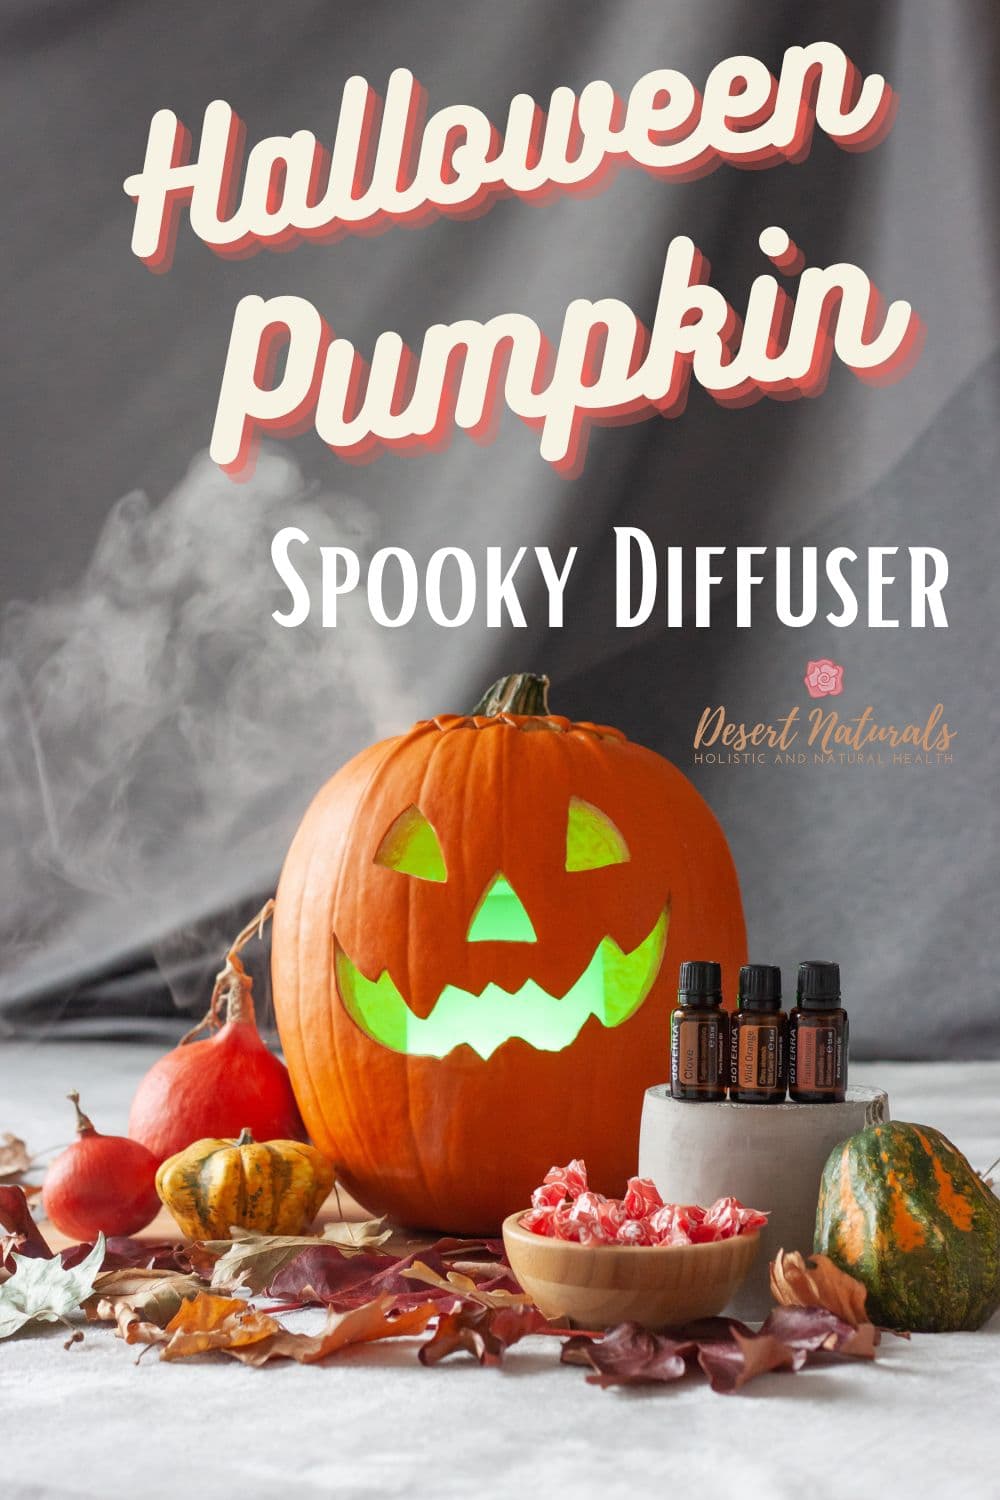 image of halloween pumpkin with diffuser inside it and doterra essential oils